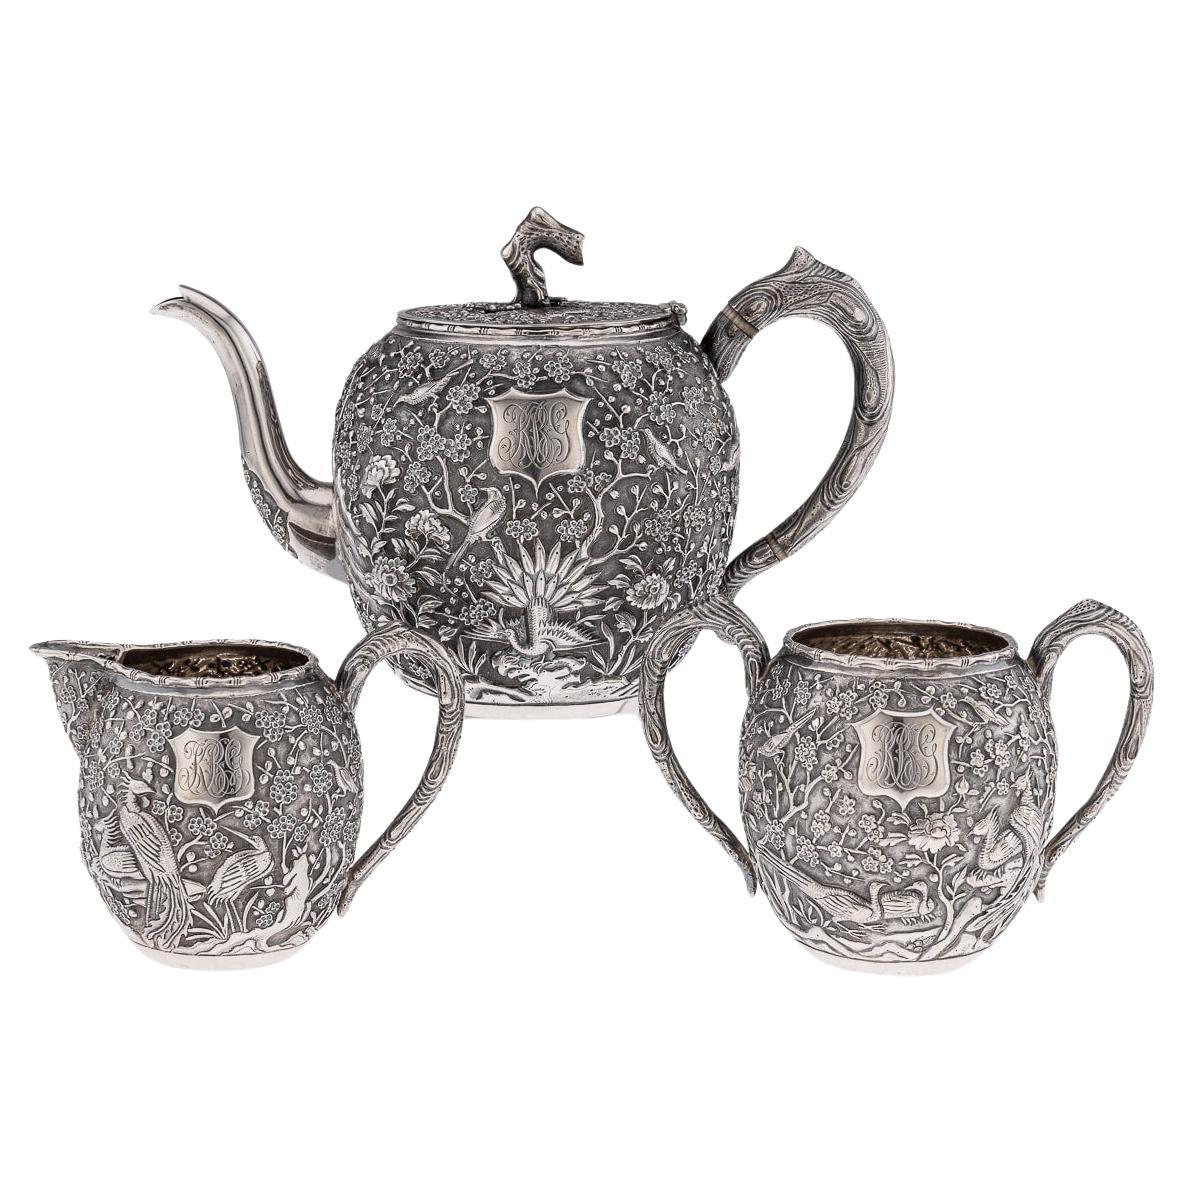 19th Century Chinese Solid Silver Cherry Blossom Tea Set, Wang Hing c.1890